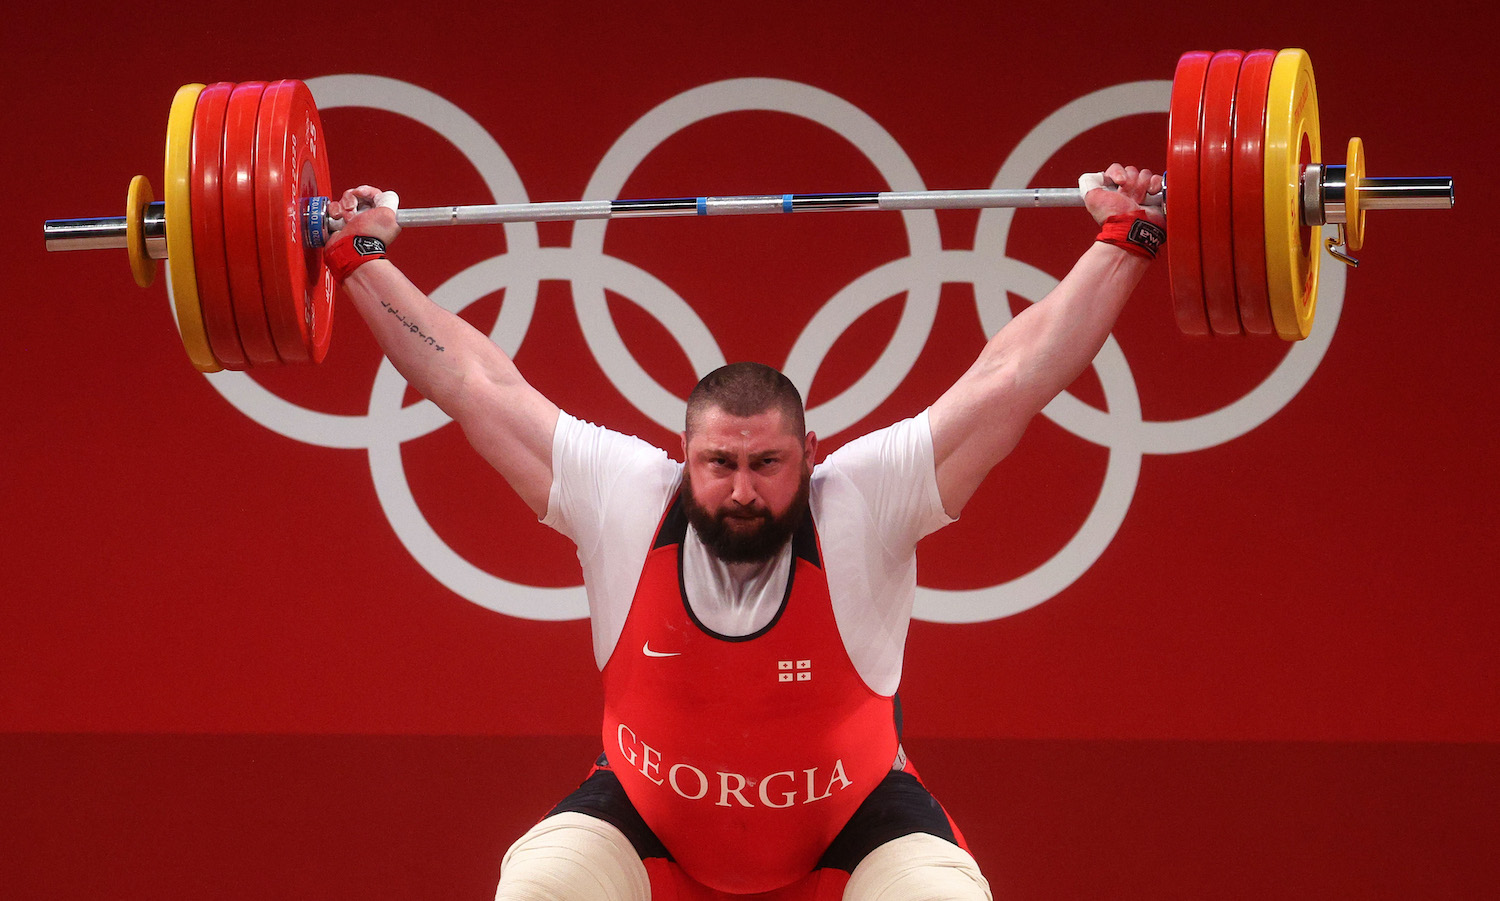 TOKYO, JAPAN - AUGUST 04: Lasha Talakhadze of Team Georgia competes during the Weightlifting - Men's 109kg+ Group A on day twelve of the Tokyo 2020 Olympic Games at Tokyo International Forum on August 04, 2021 in Tokyo, Japan. (Photo by Chris Graythen/Getty Images)